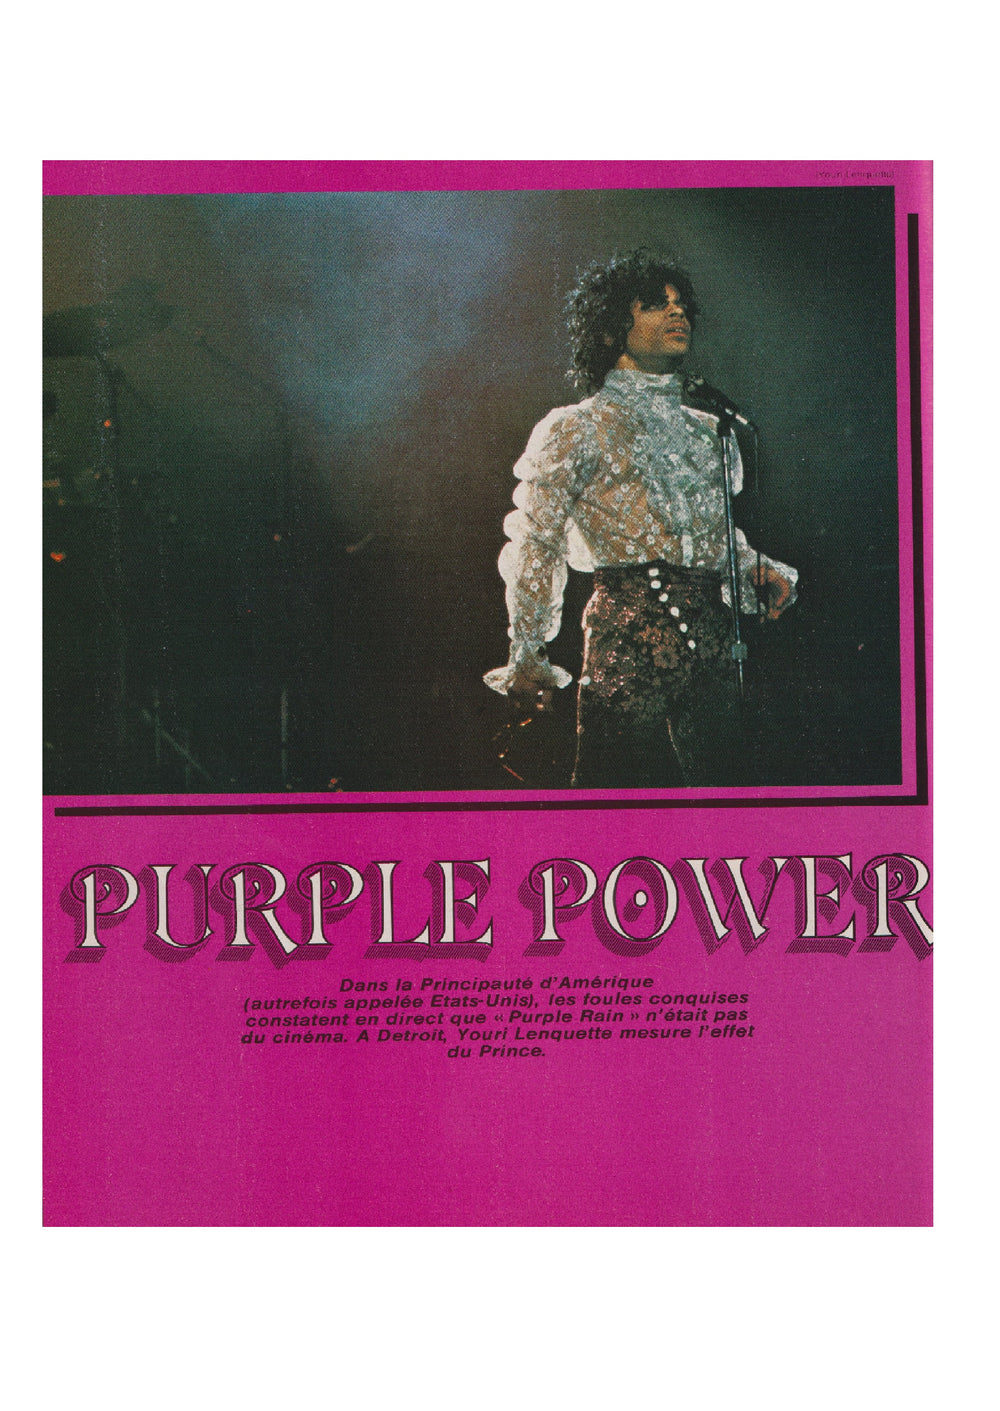 Prince –  French Best Magazine Cover & 6 Page Article Preloved As New: 1985